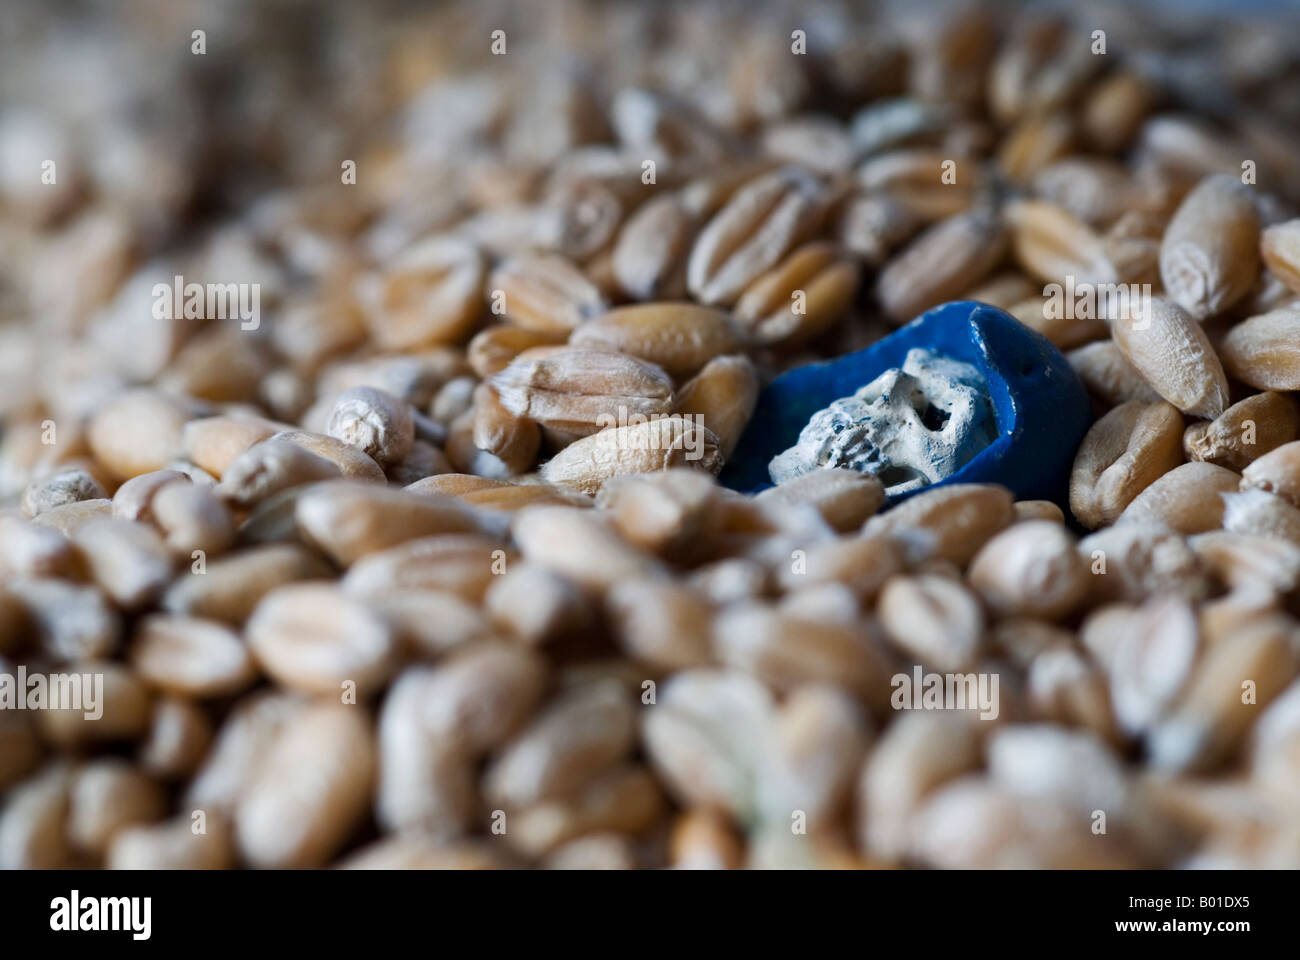 Stock photo of a model of the grim reaper standing in a pile of grain Stock Photo